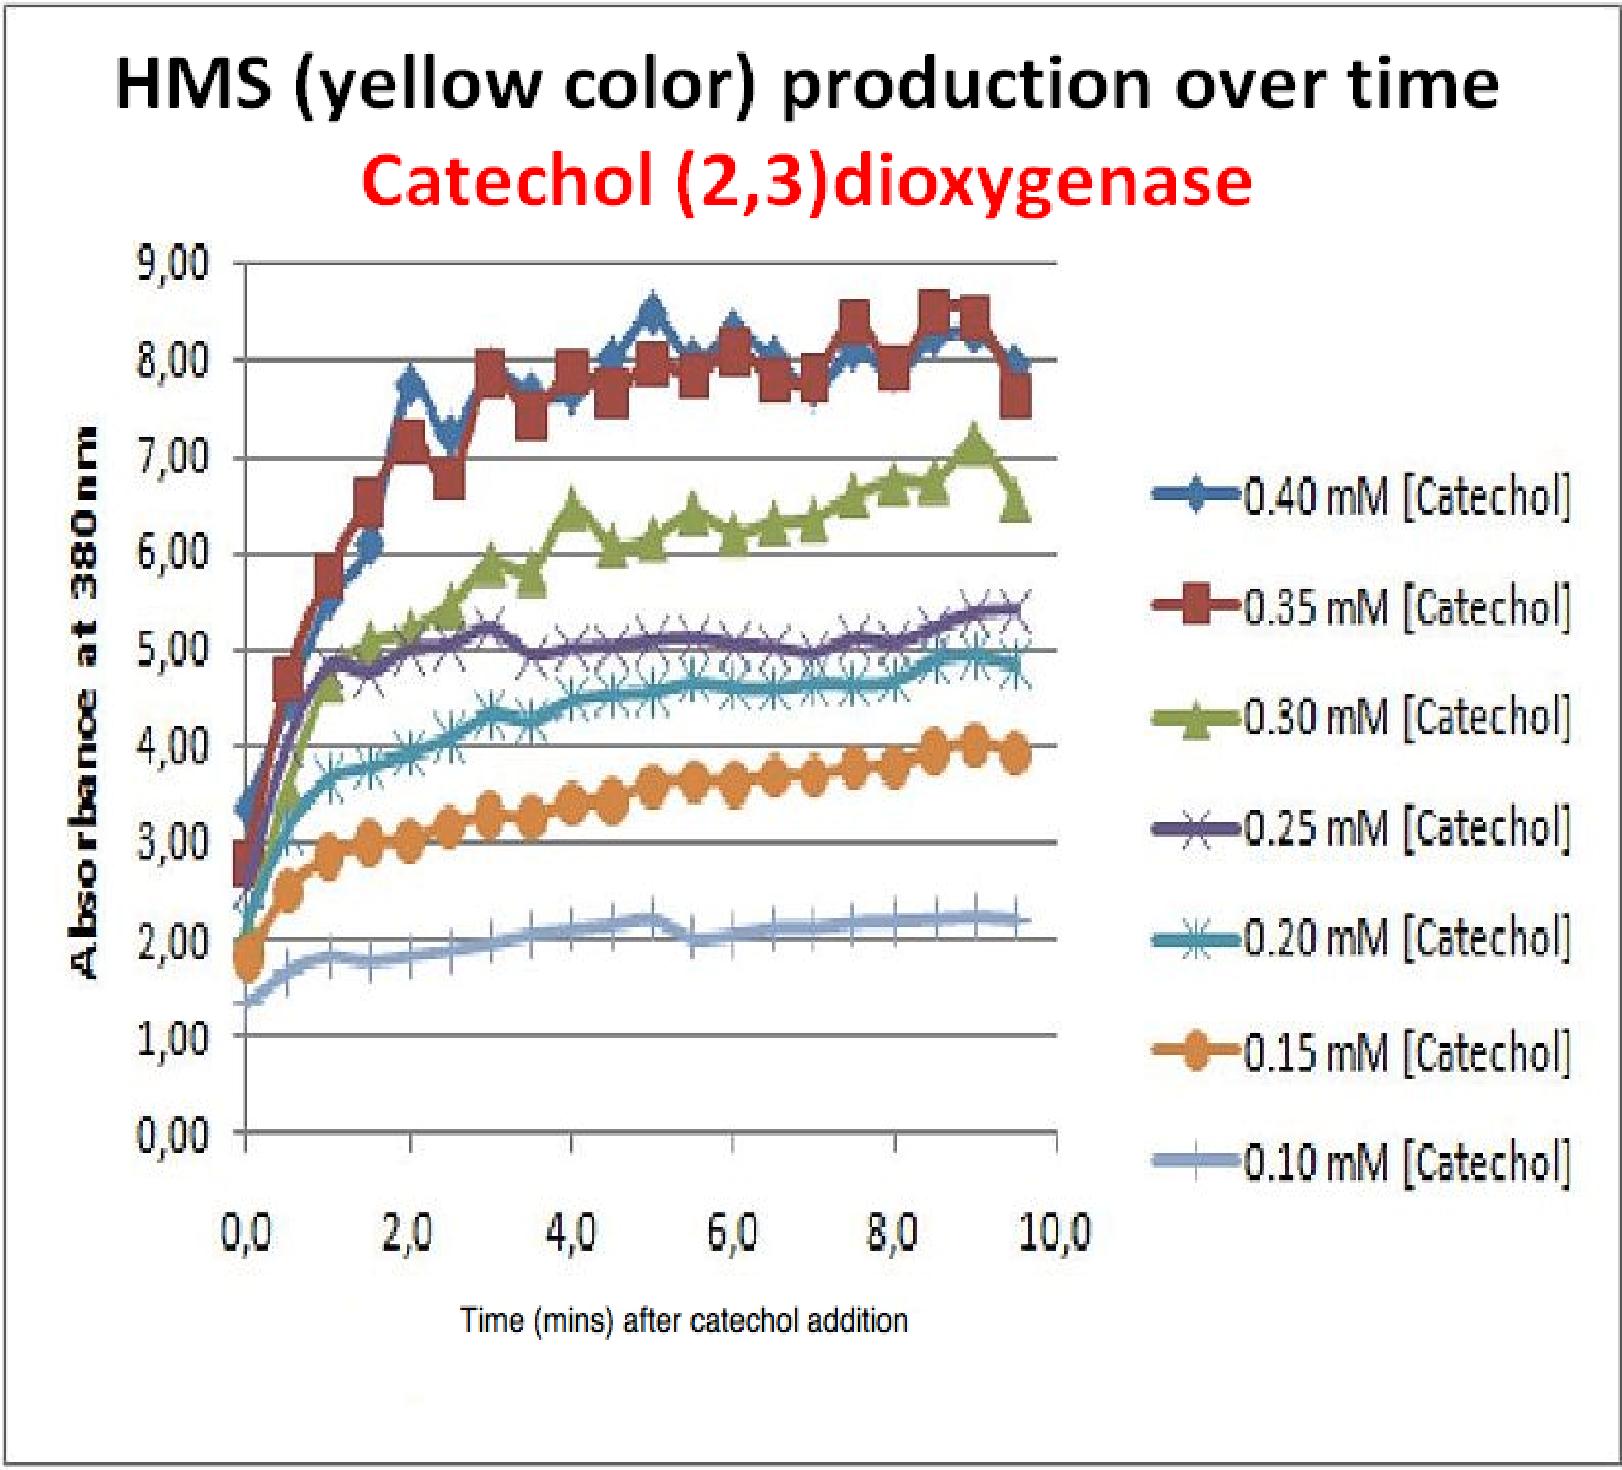 Graph shows production of HMS (yellow product) over time after catechol addition at time 0 minutes. Different curves represent different catechol concentration added to the cell cultures.